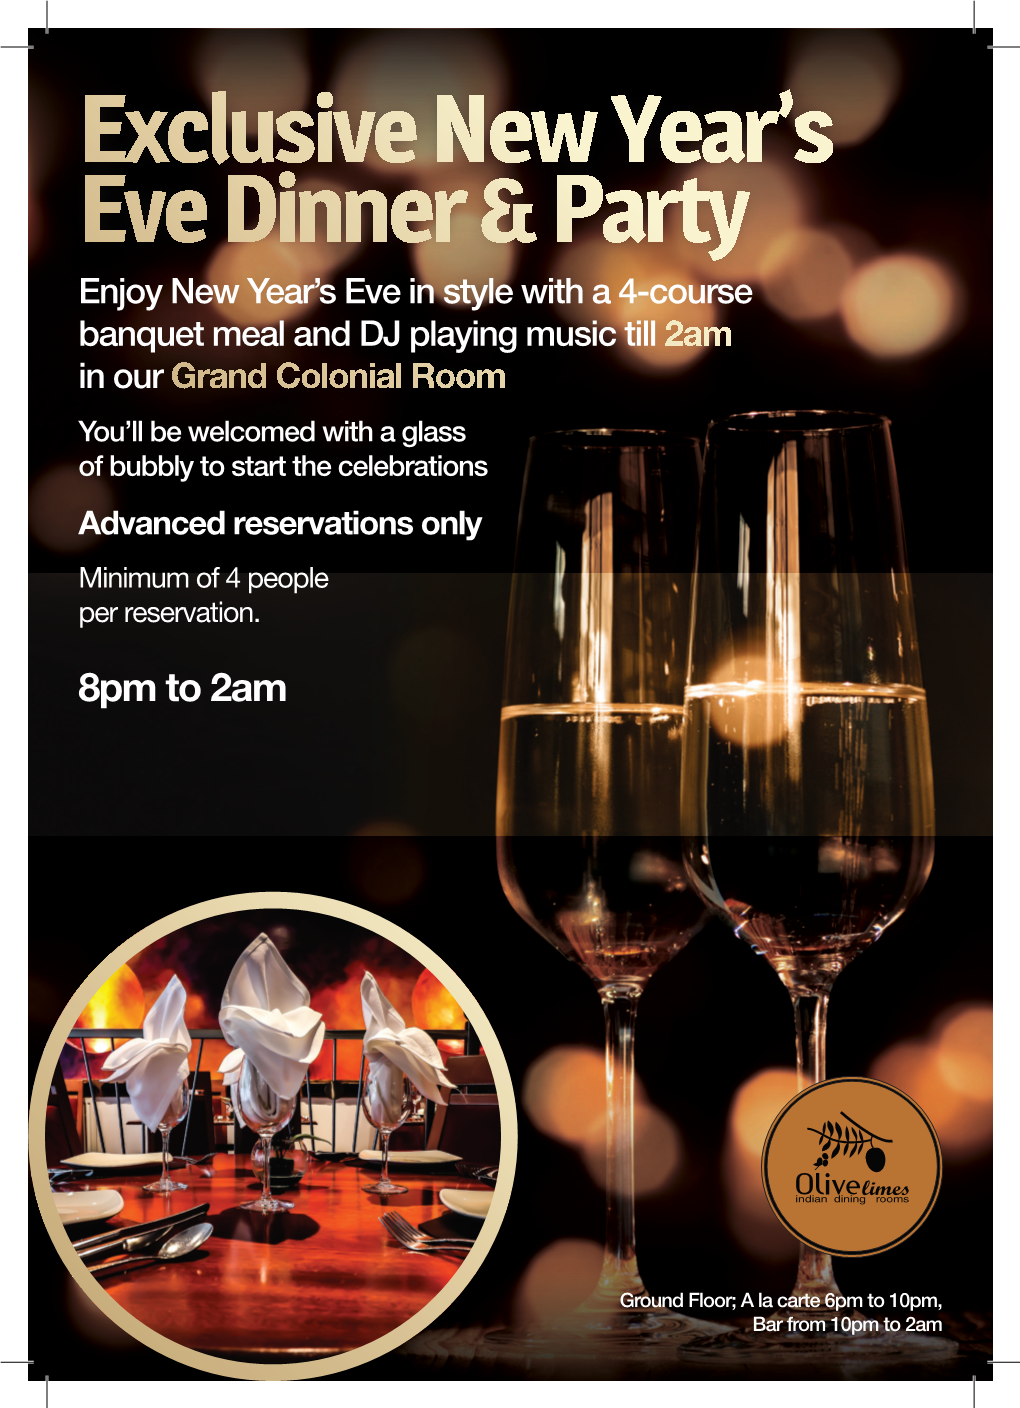 Exclusive New Year's Eve Dinner & Party